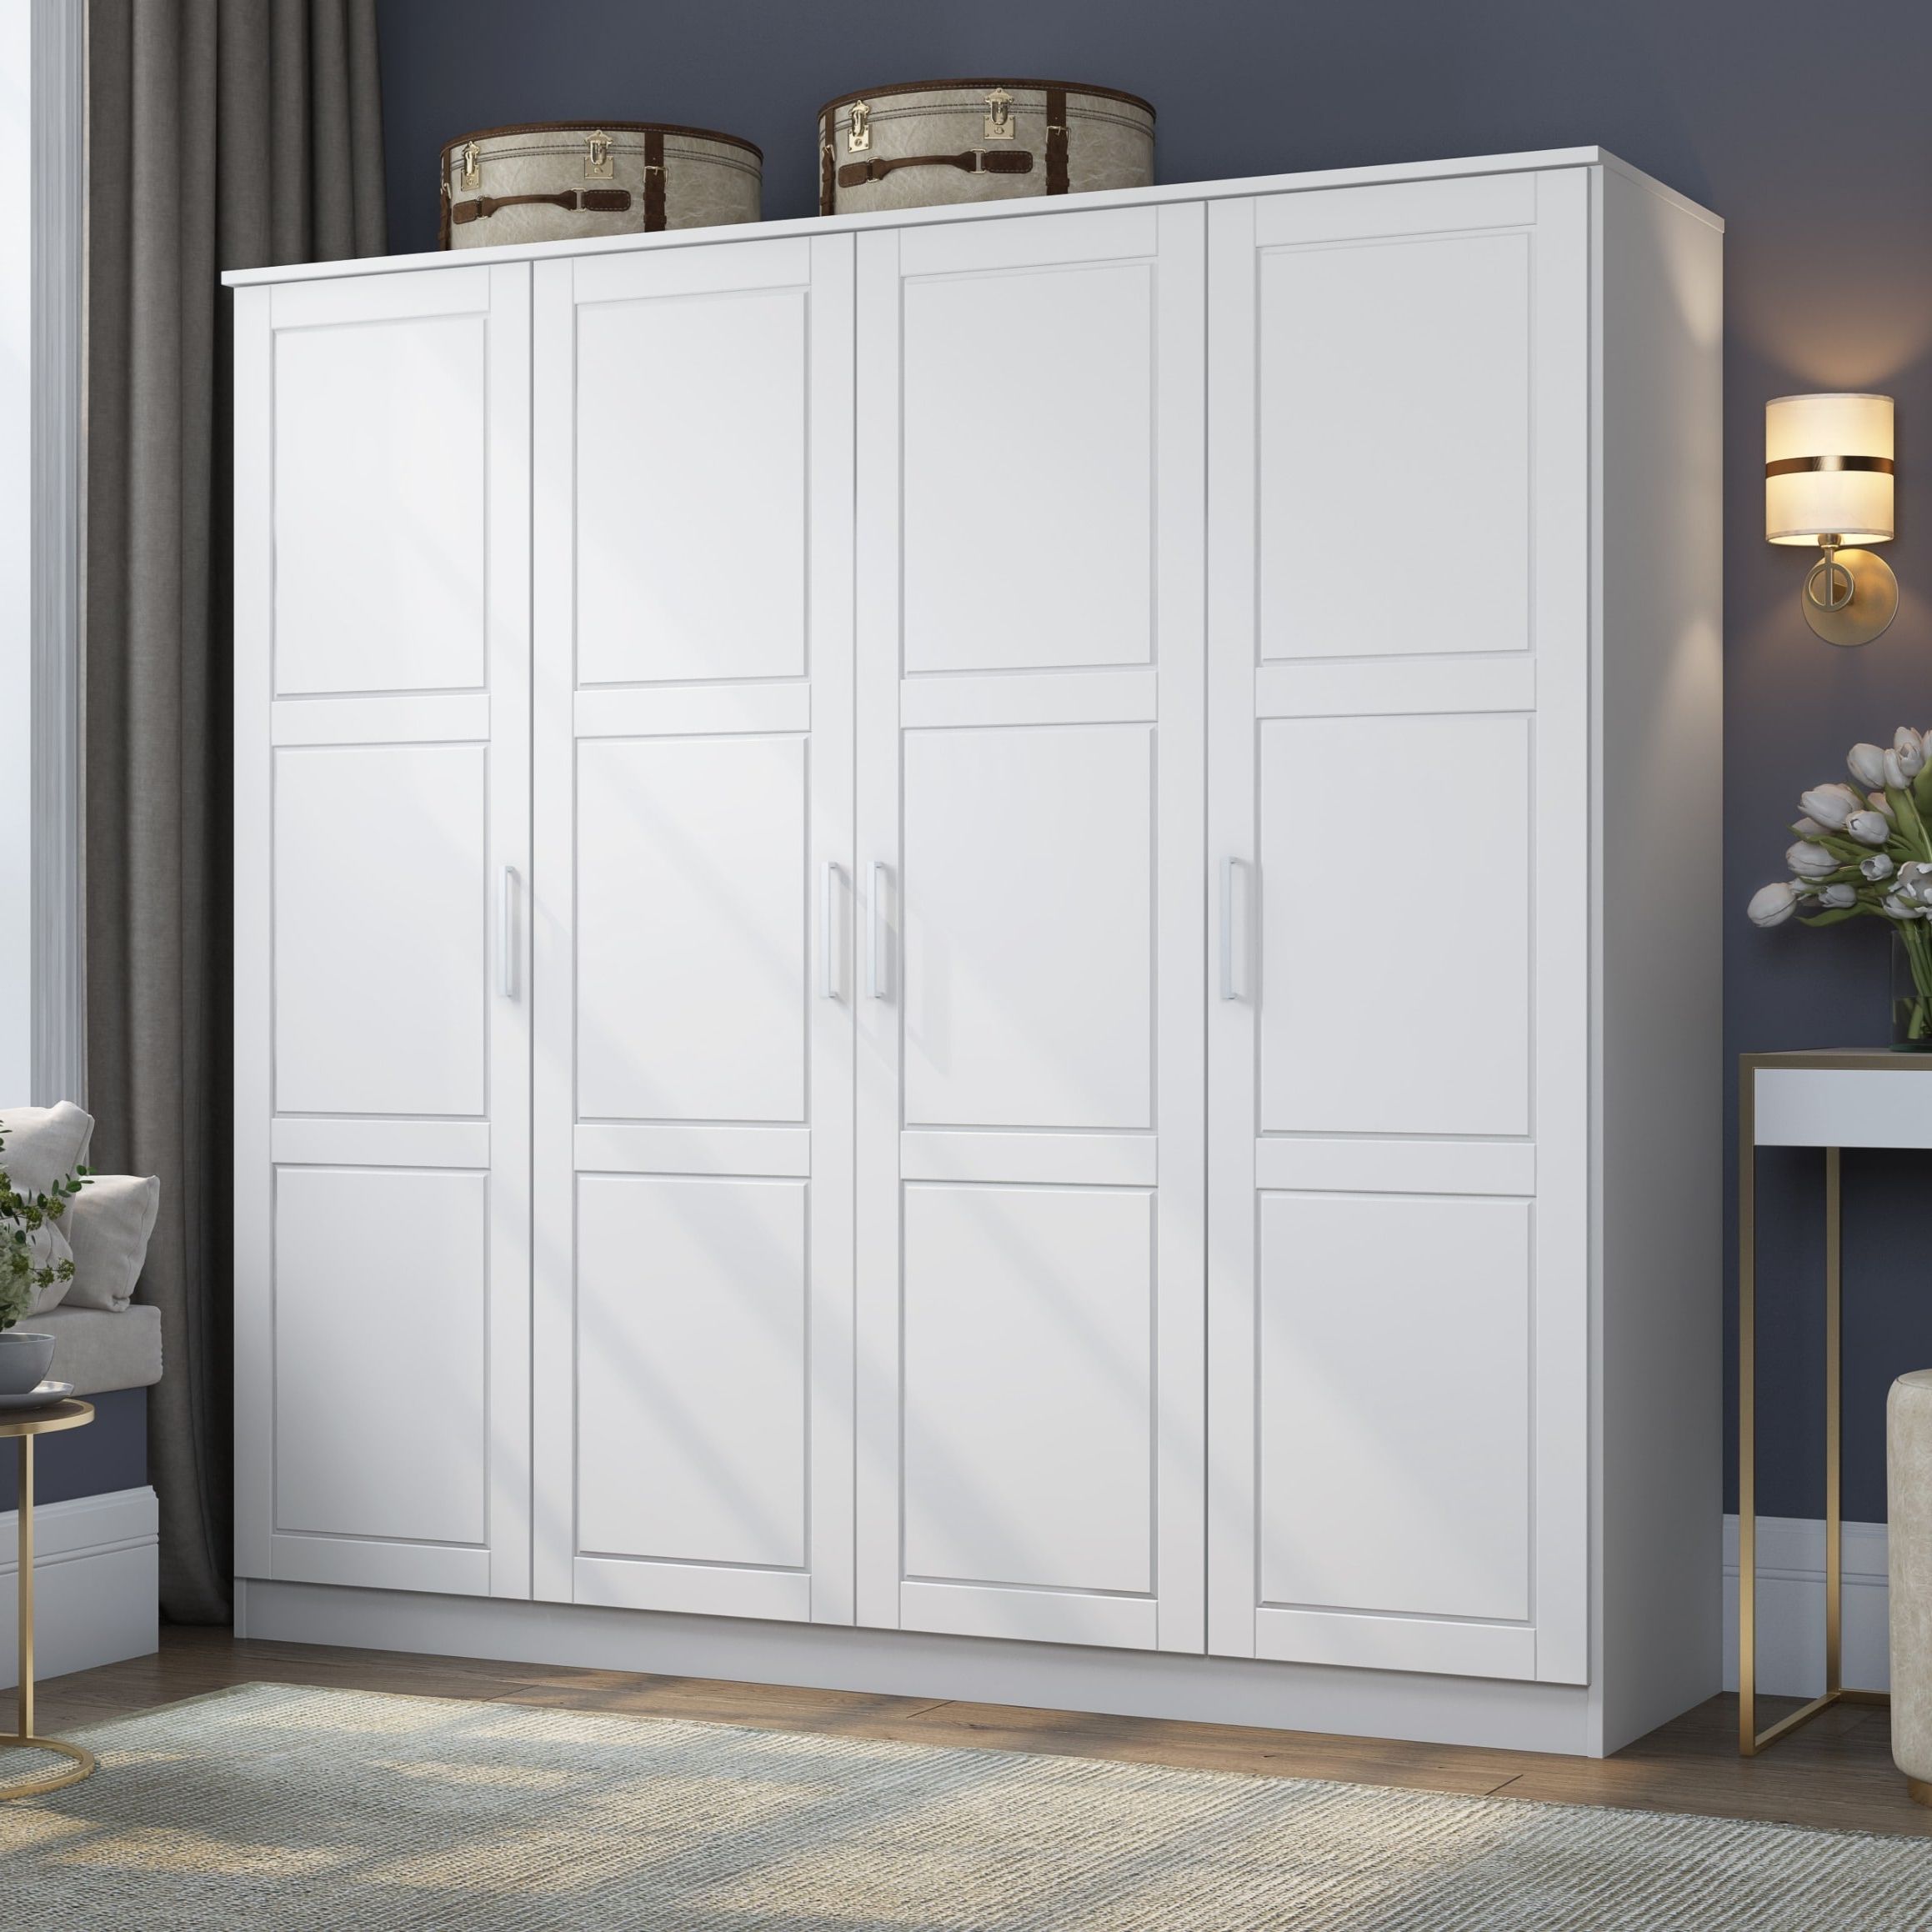 100% Solid Wood Cosmo 4 Door Wardrobe With Solid Wood Or Mirrored Doors –  On Sale – Bed Bath & Beyond – 37717187 Throughout 4 Door White Wardrobes (View 13 of 20)